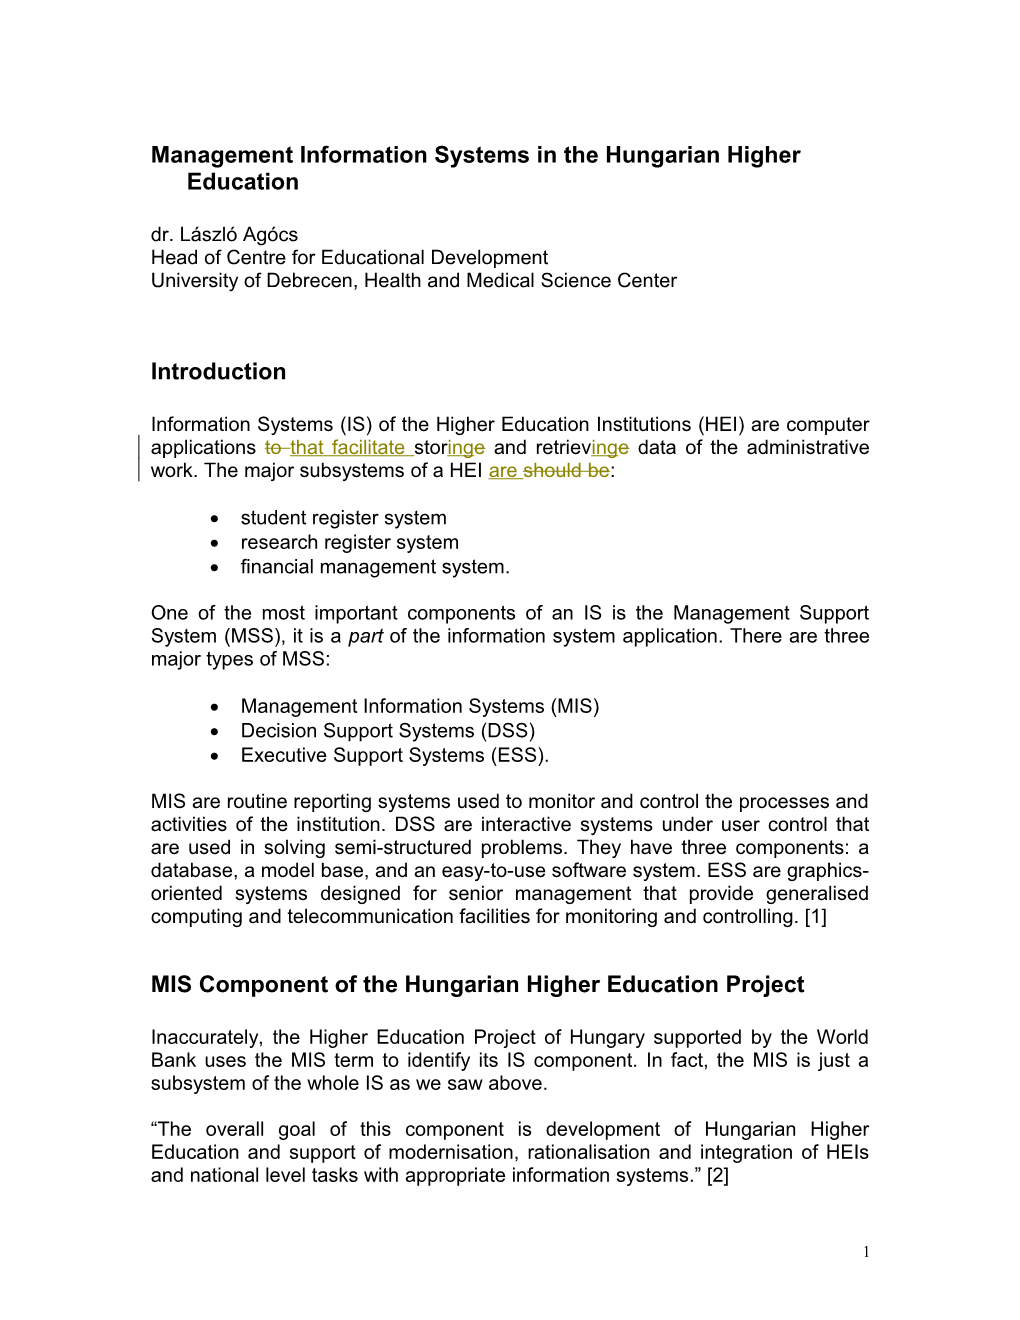 Management Information Systems for the Modernization of Hungarian Higher Education